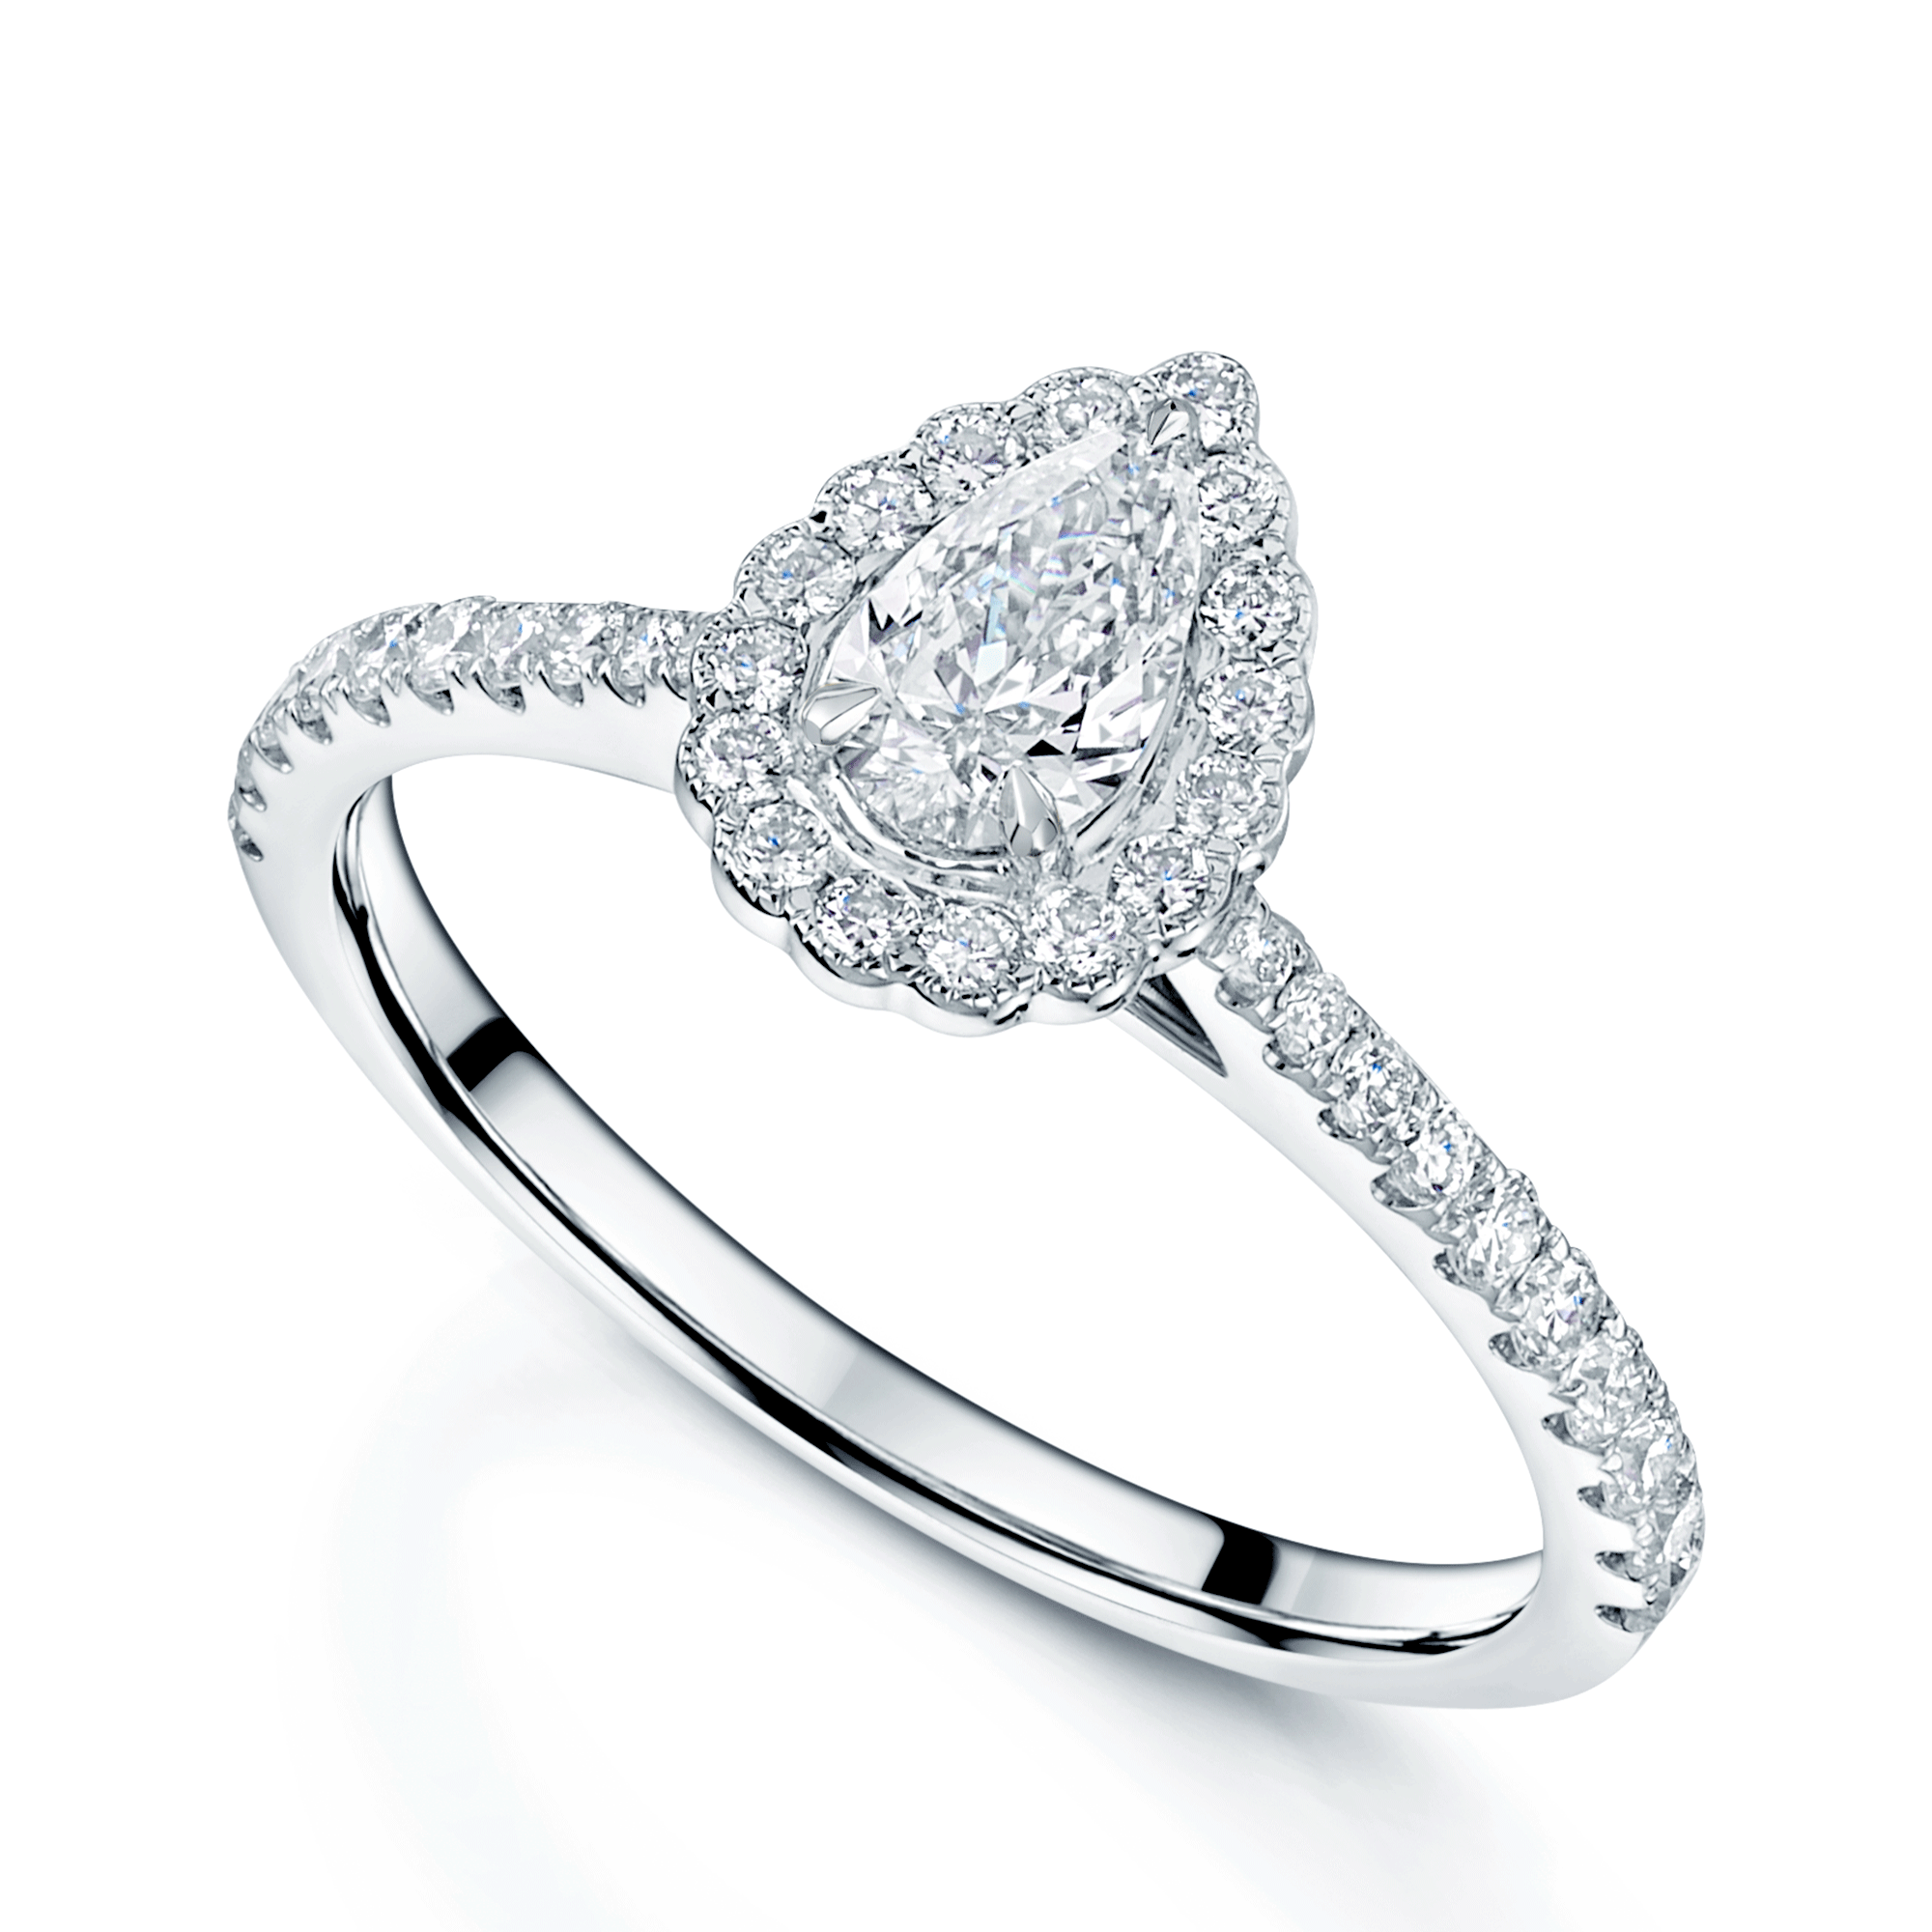 Platinum GIA Certificated Pear cut Diamond Halo Ring With Diamond Set Shoulders